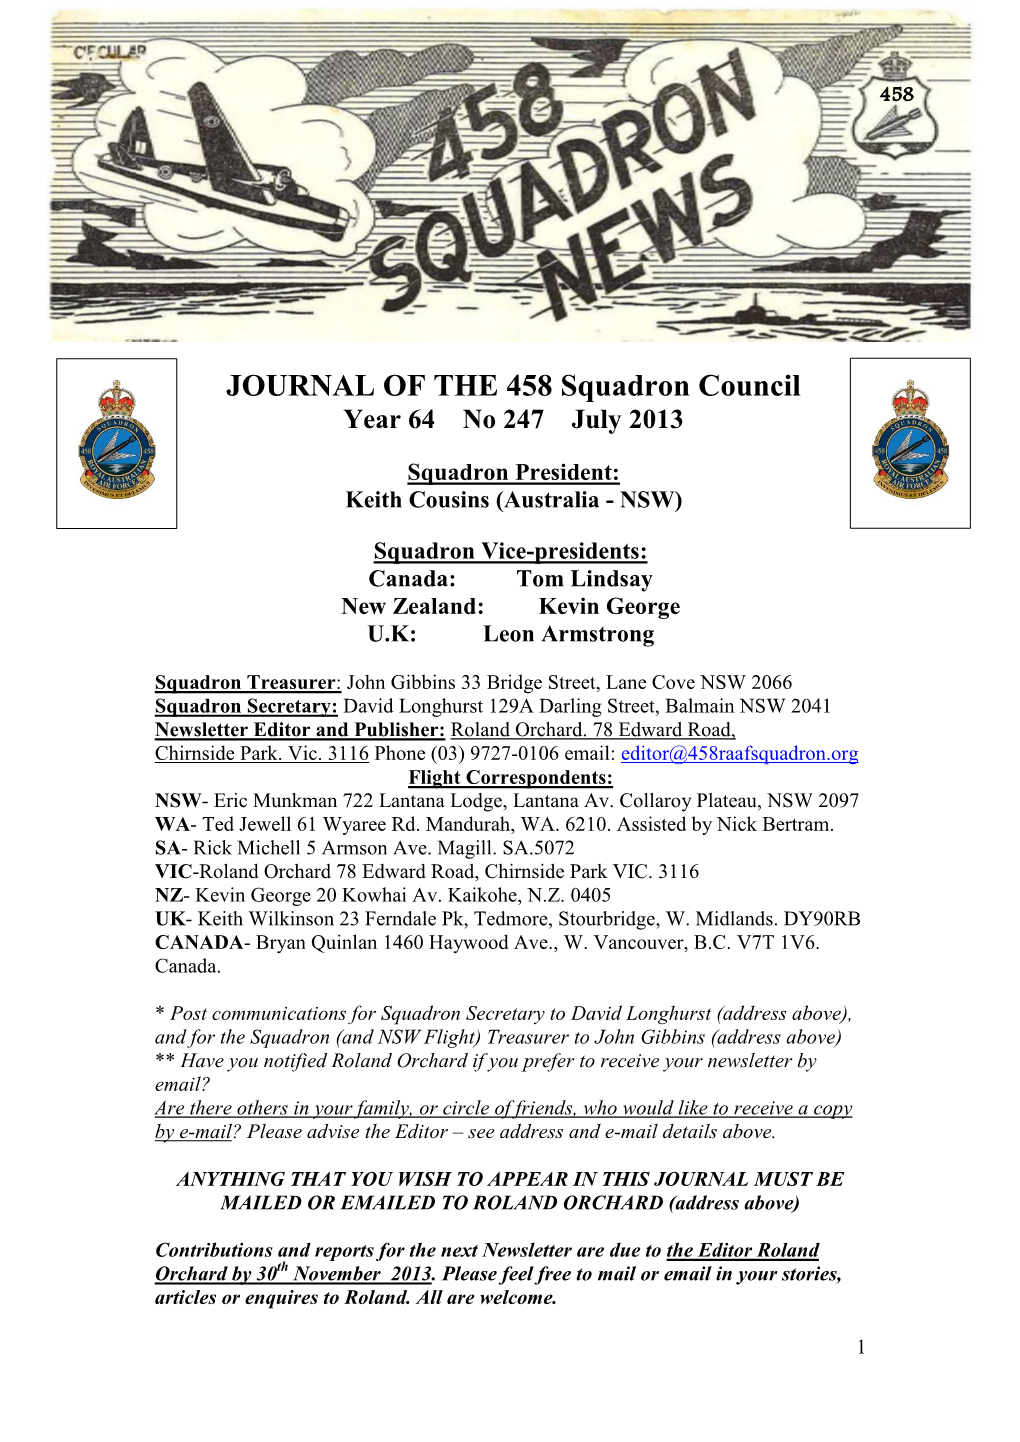 JOURNAL of the 458 Squadron Council Year 64 No 247 July 2013